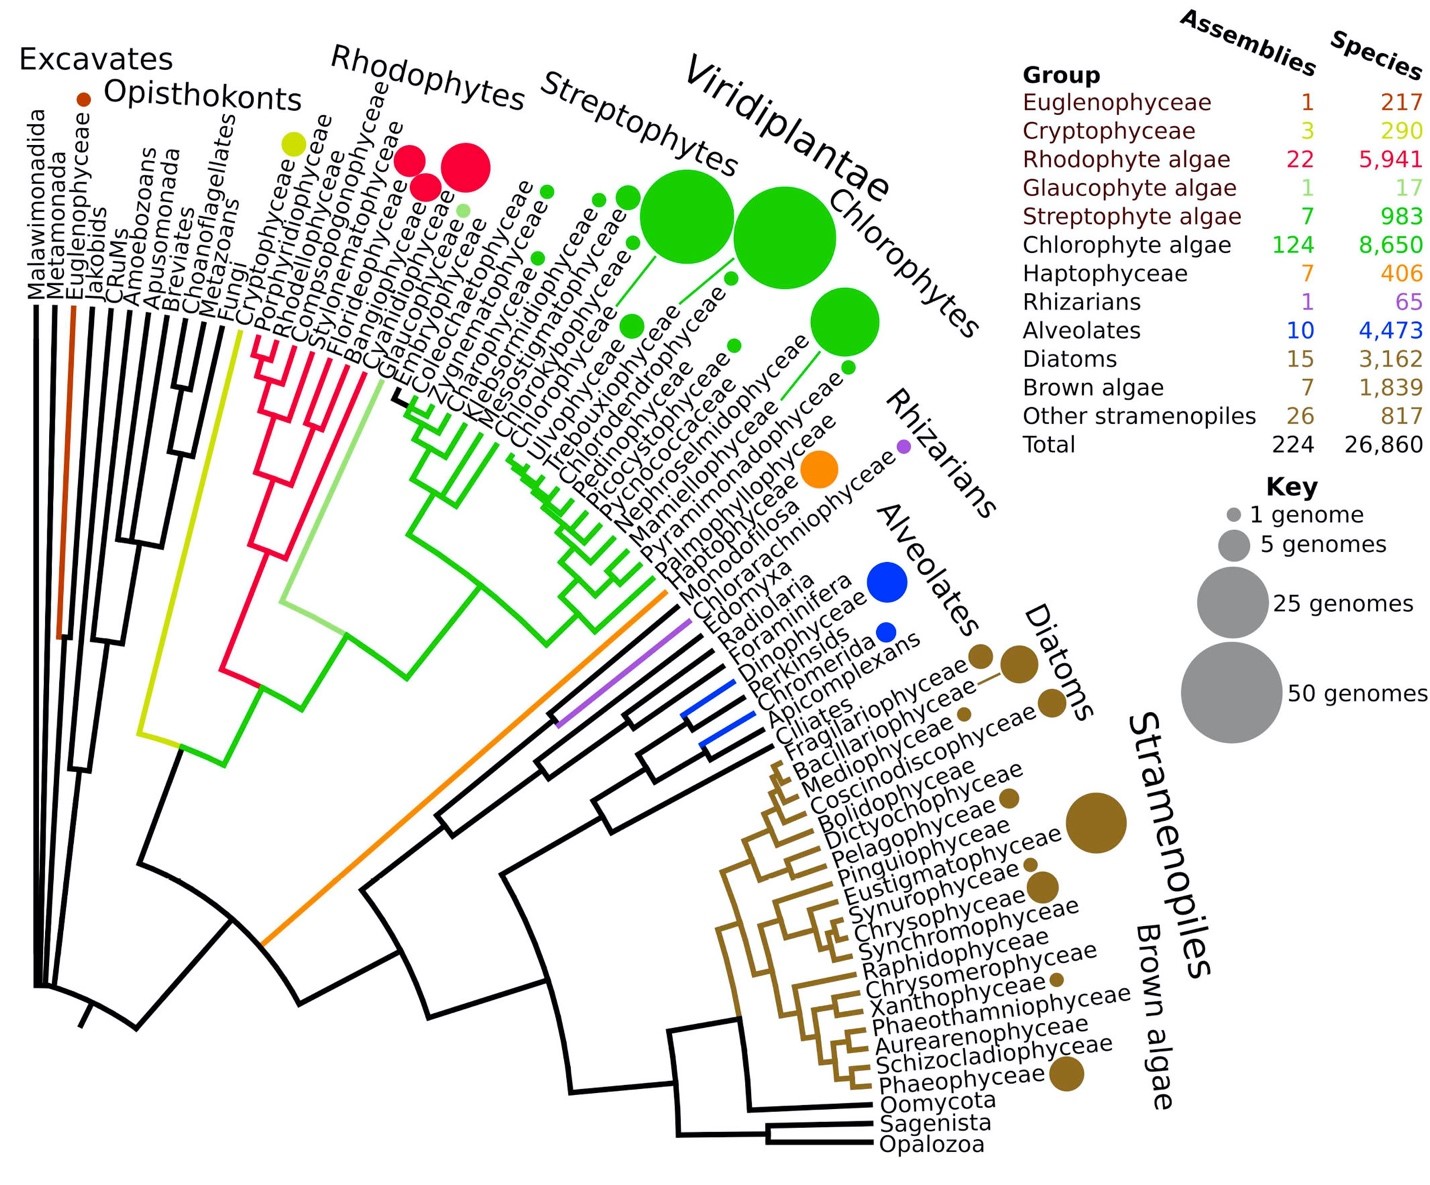 Species distribution of assembled algal genomes showing classes of algae and major groups of non-algae based on recent phylogenomic analyses and reviews. 